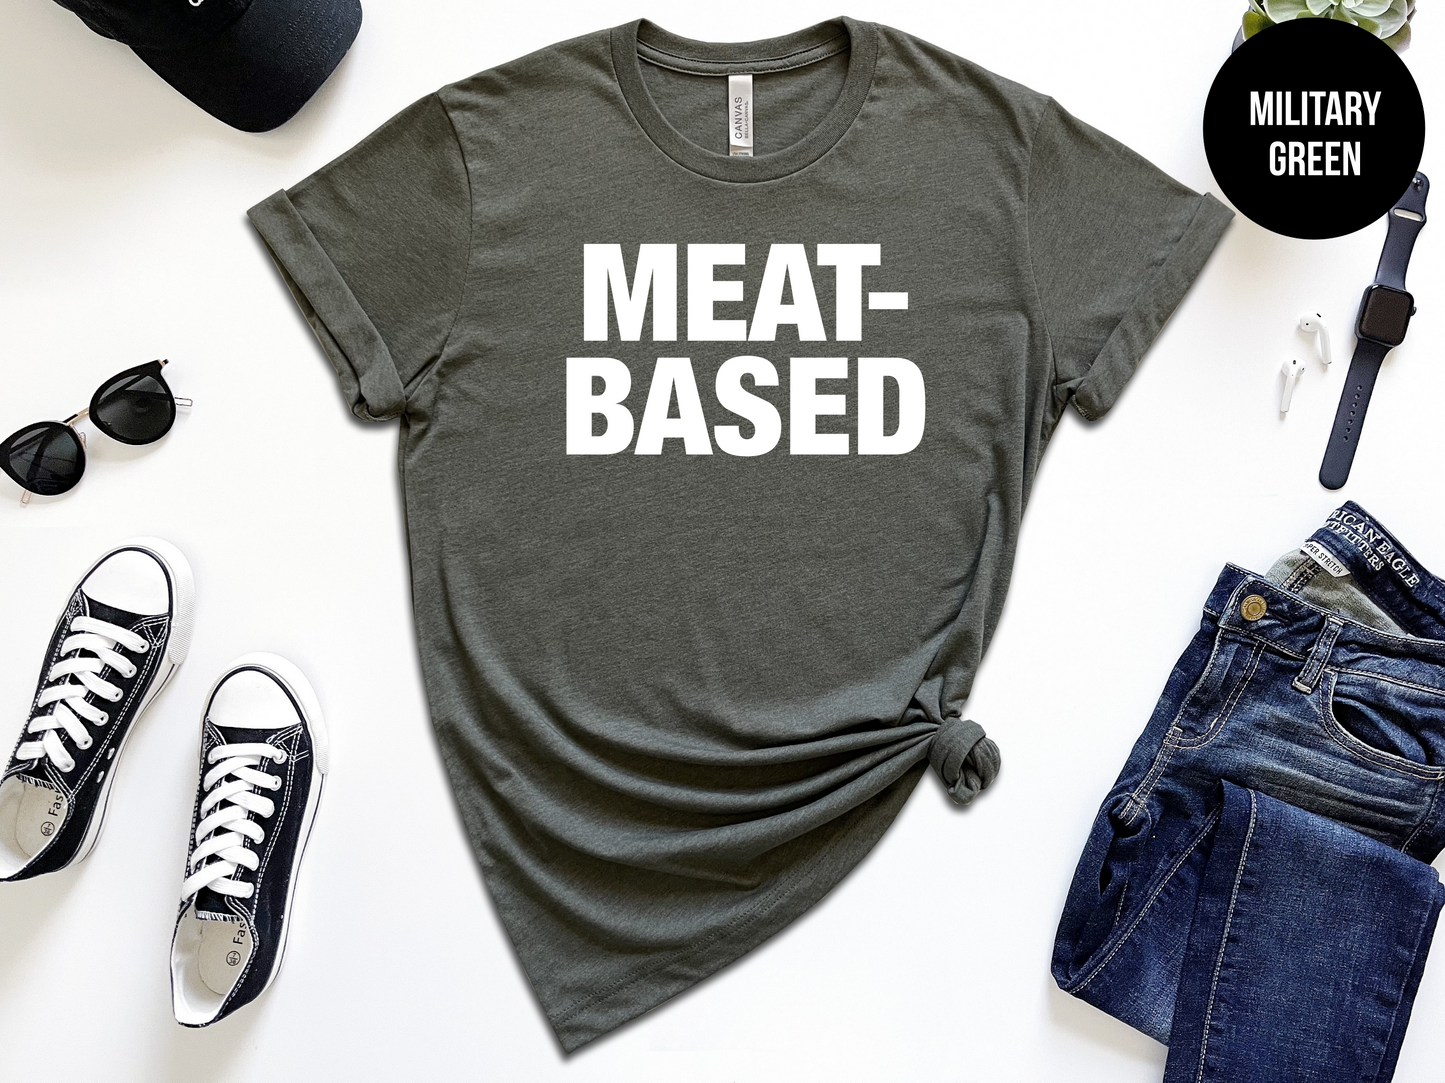 Meat-Based